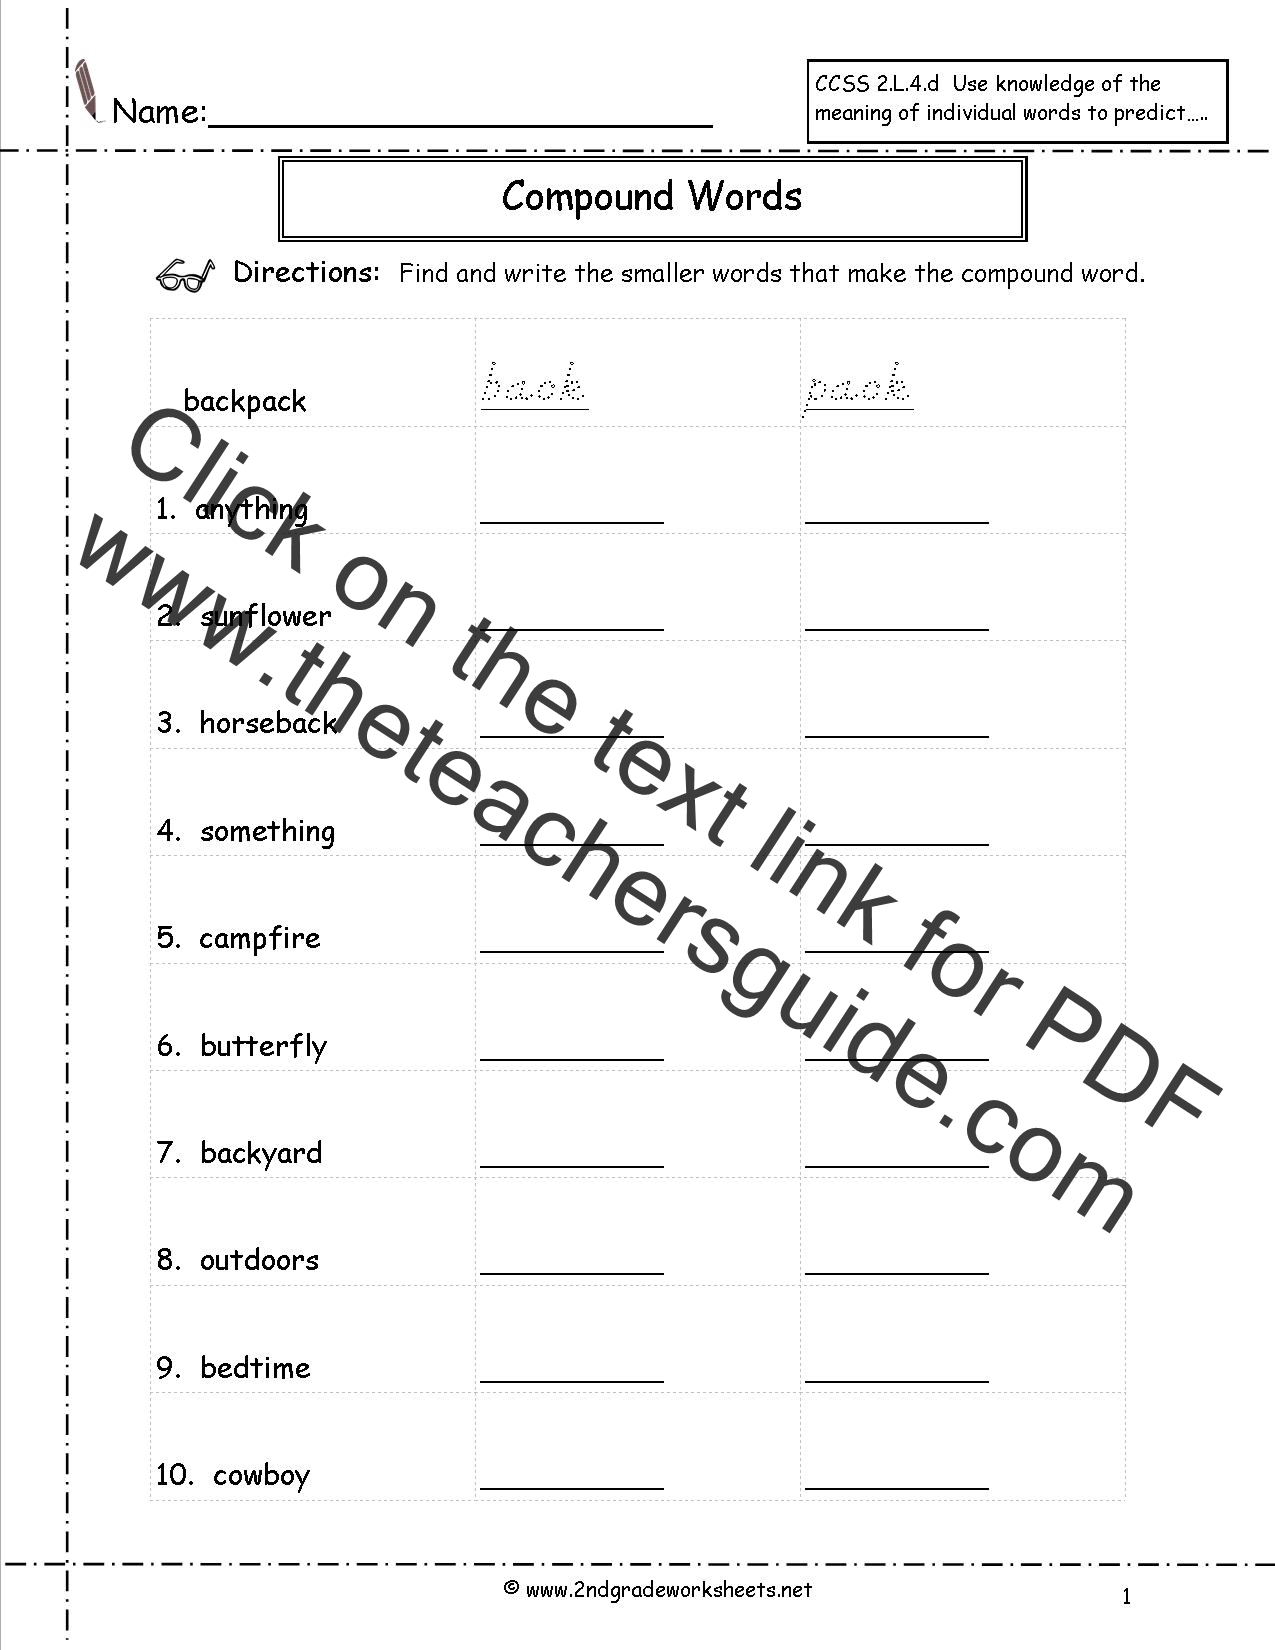 compound-words-worksheets-search-results-calendar-2015